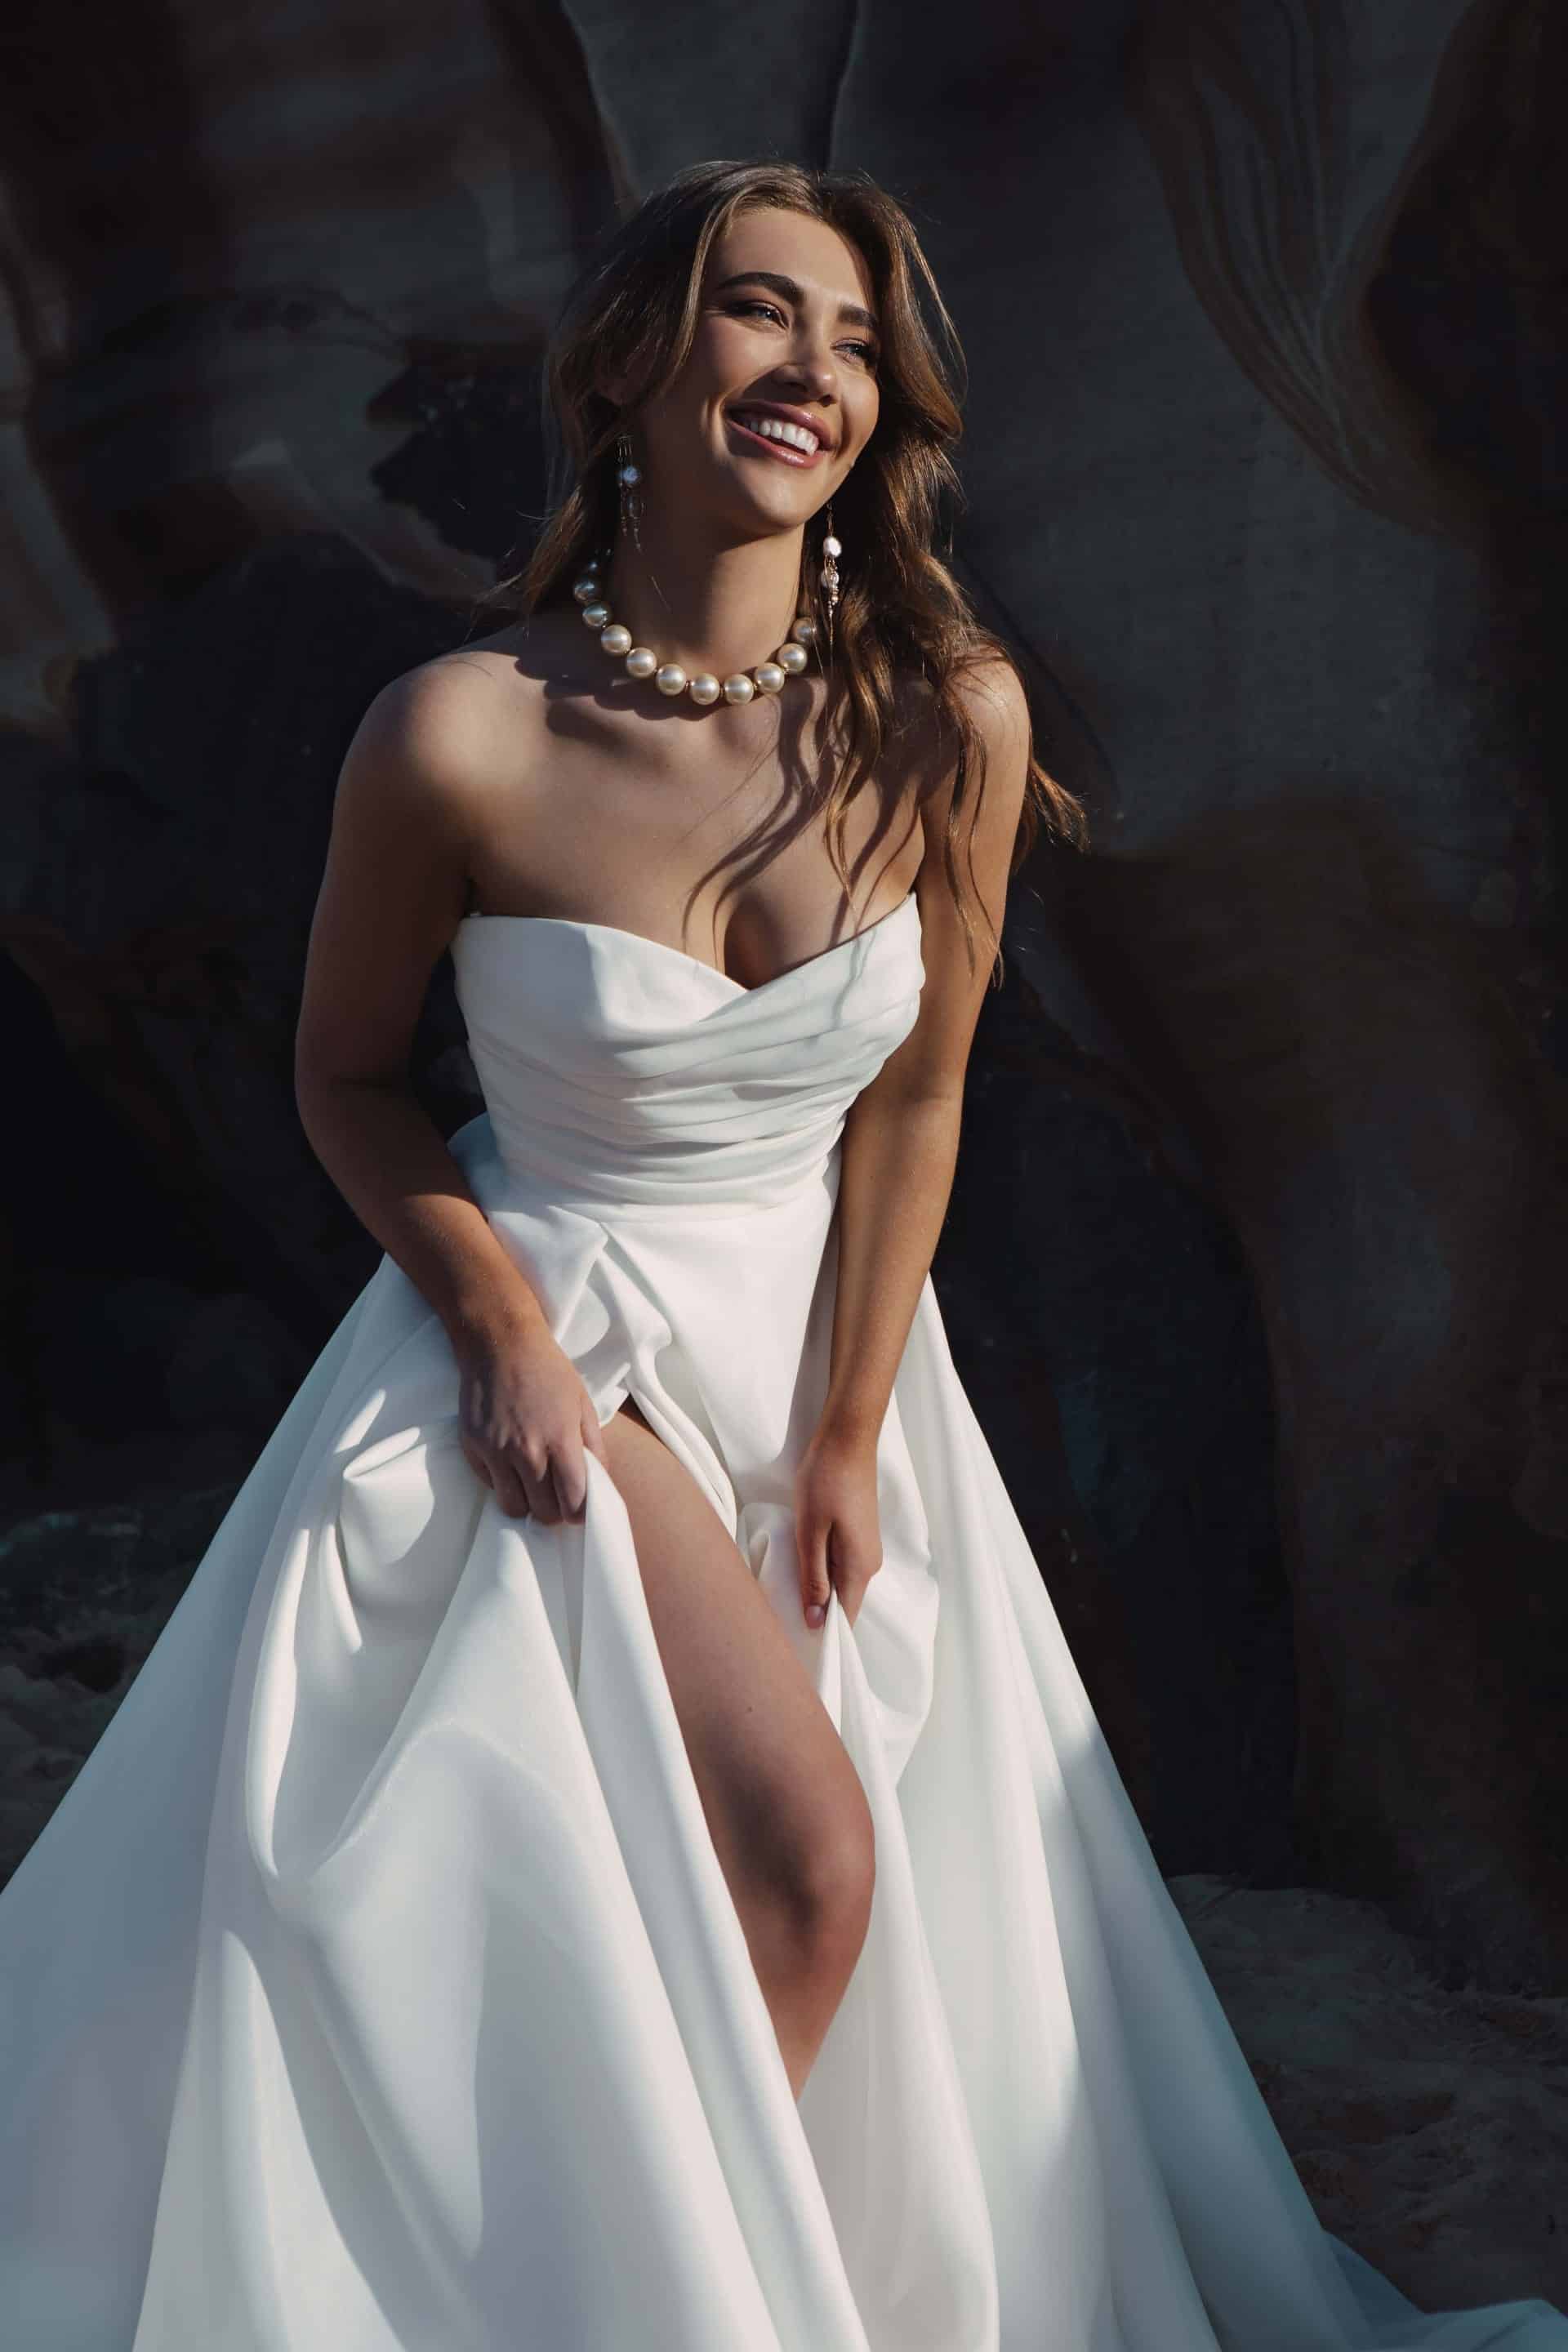 https://www.petertrends.com/wp-content/uploads/2022/10/Brittany-wedding-dress-from-Emanuella-Collection-by-Peter-Trends-Br-2.jpg